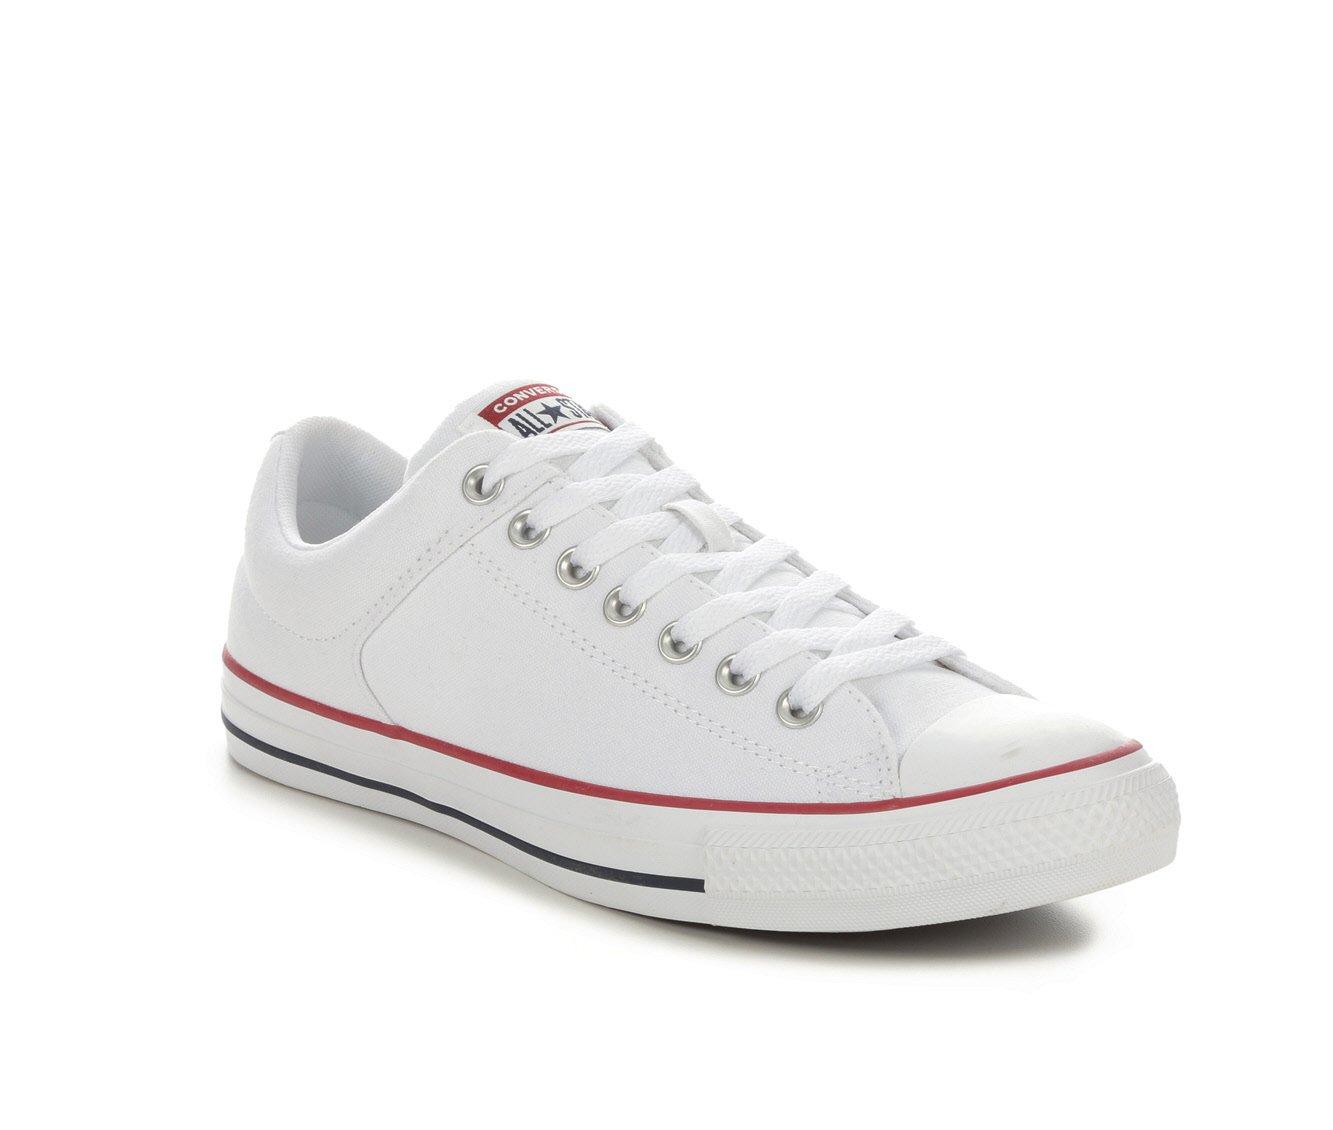 Converse Chuck Taylor Star Foundation Sneakers